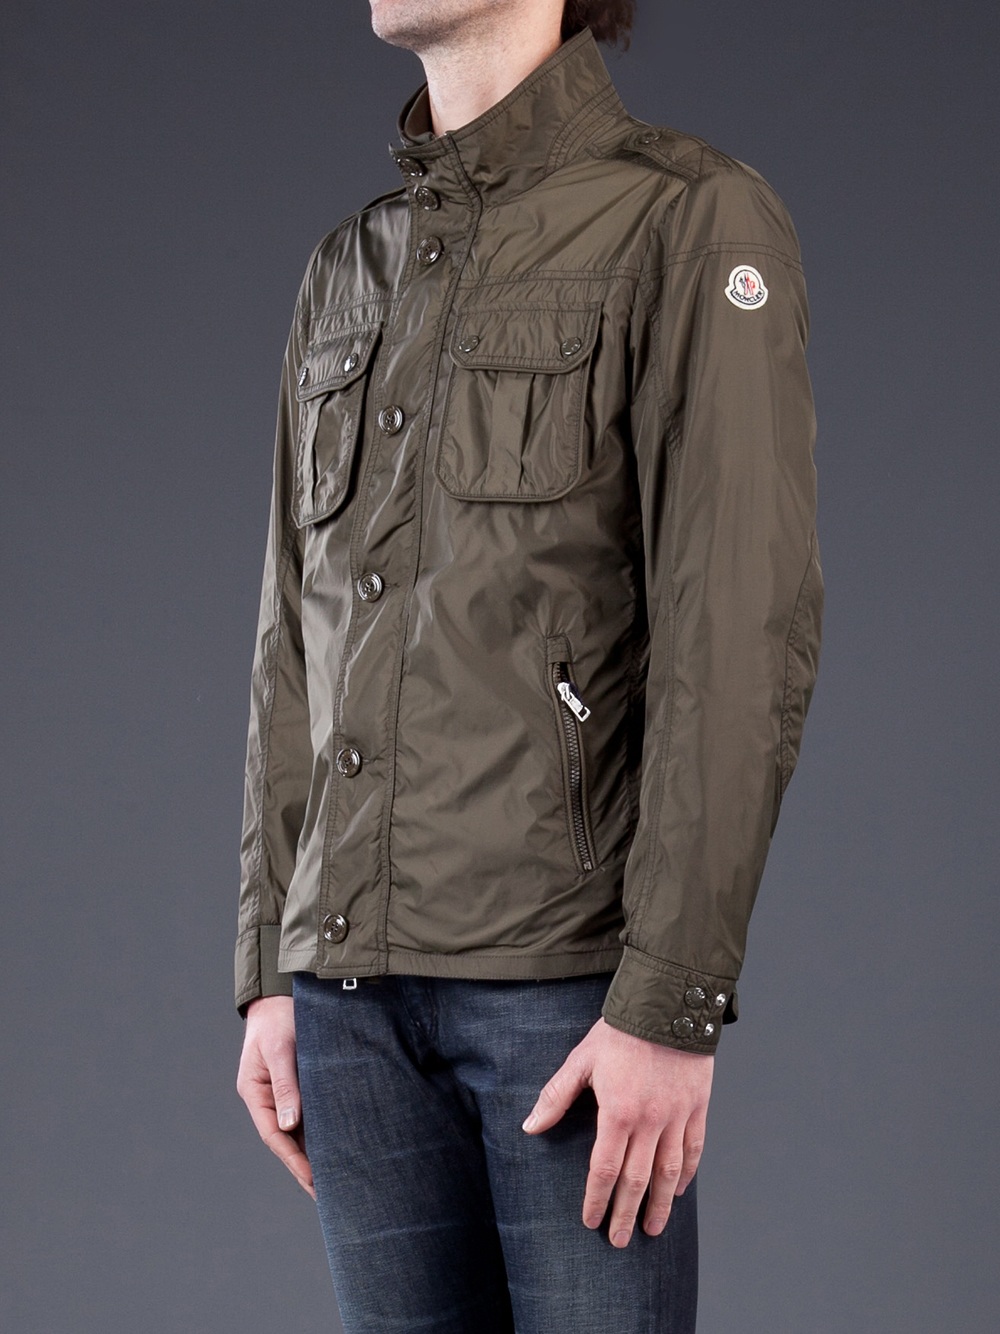 Moncler Mate Jacket on Sale, GET 53% OFF, www.federalgrantswire.com